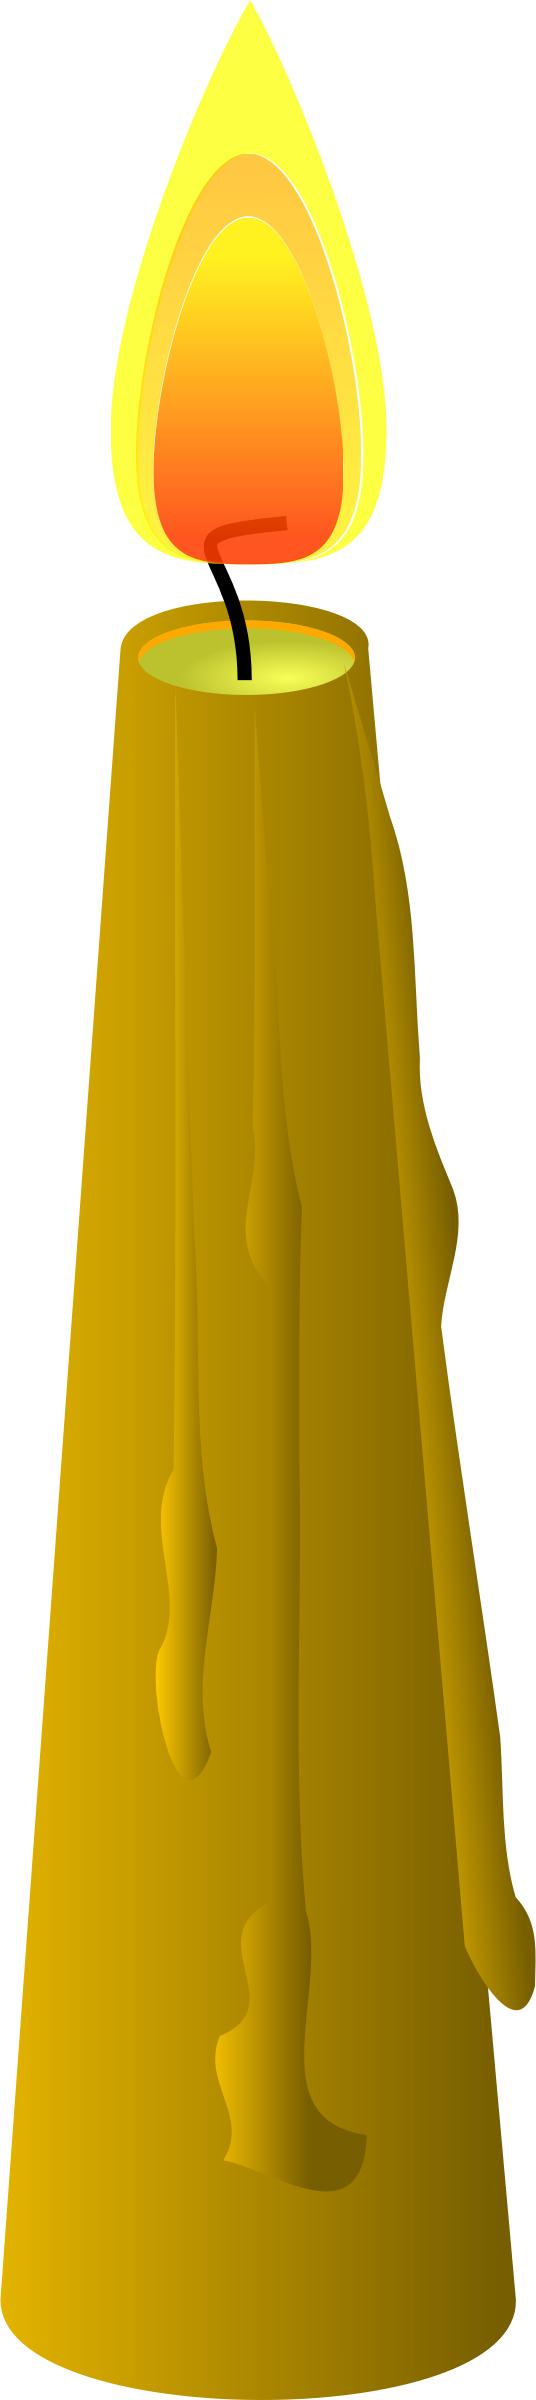 Beeswax Taper Candle png